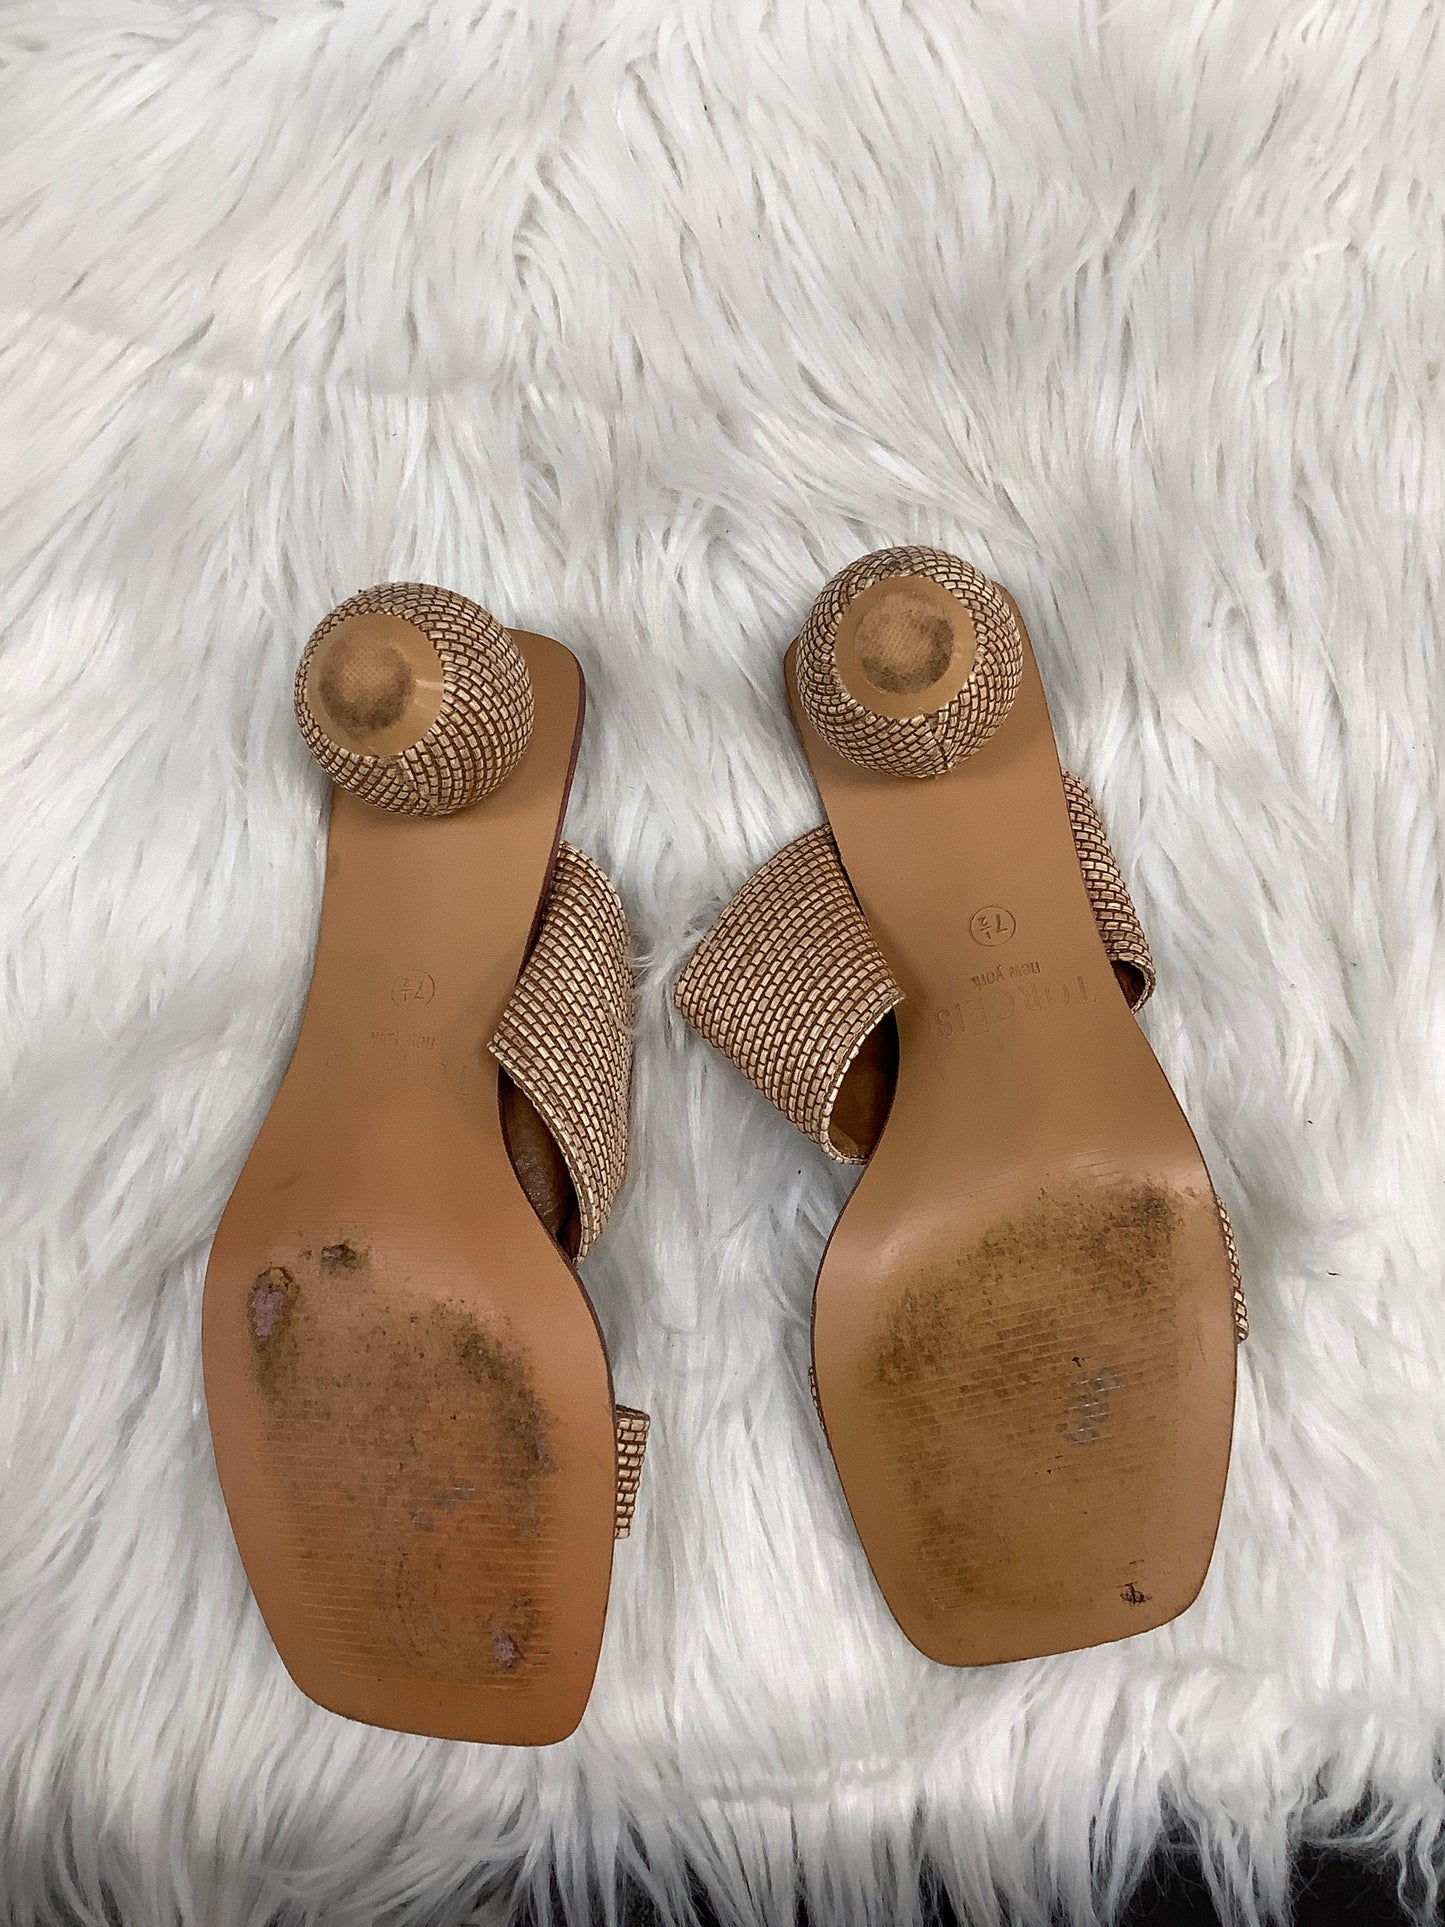 Sandals Heels Block By Cme  Size: 7.5